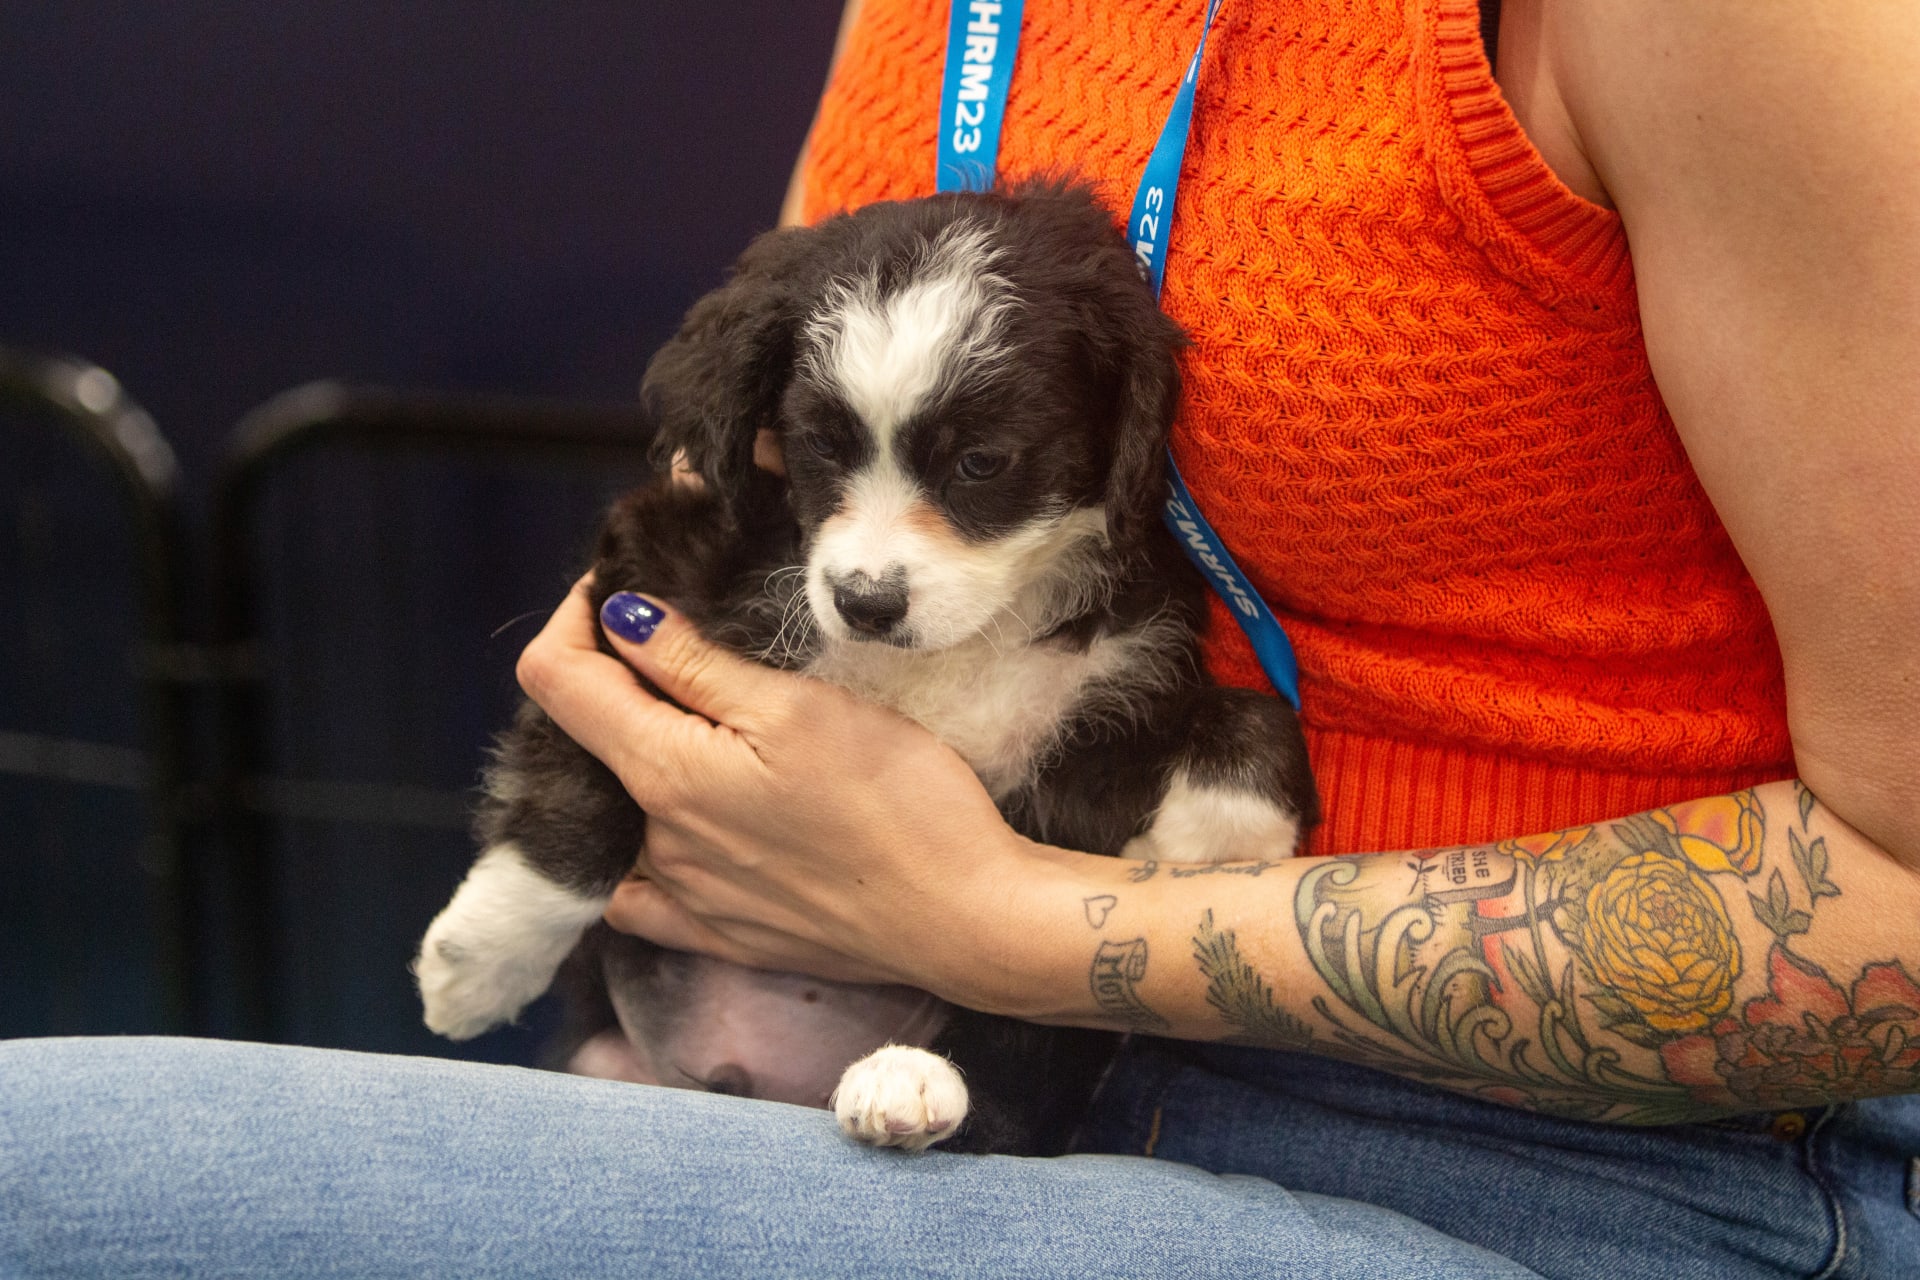 Nora McInerny, an author, podcast host and founder of Feelings & Co., holds spaniel puppy Captain Hook(Mauro Whiteman/SHRM)